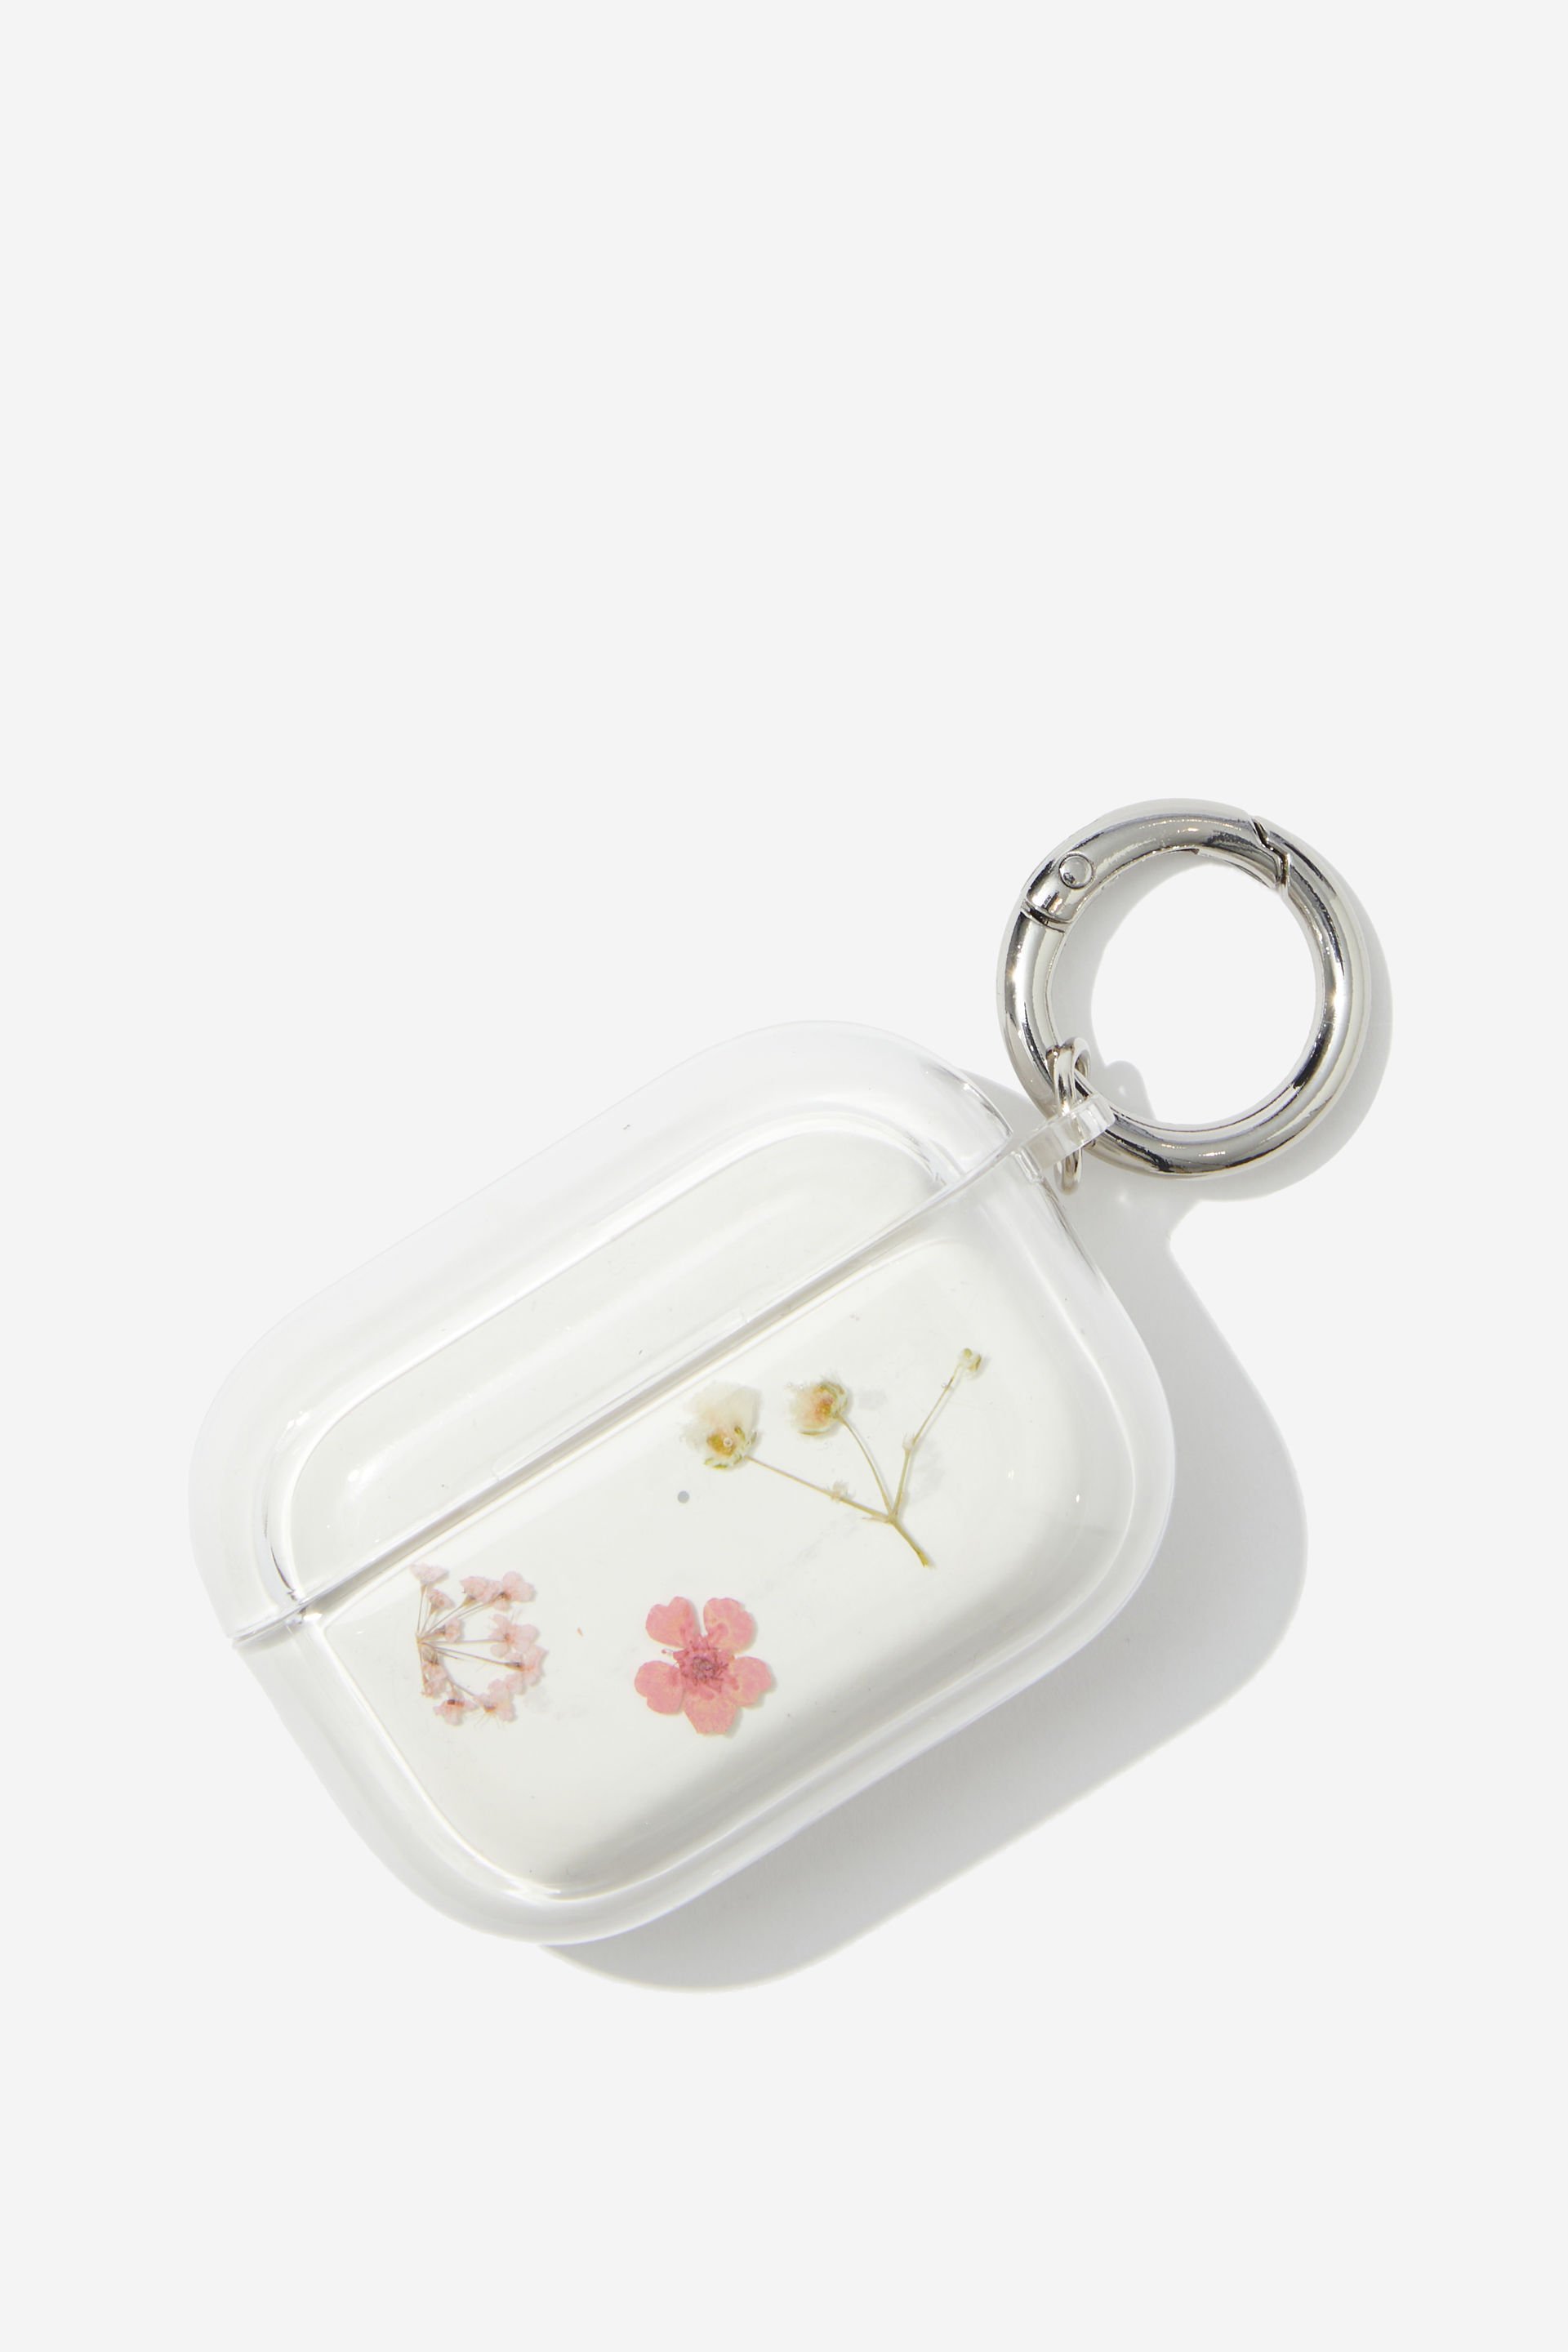 Typo - Earbud Case Pro - Trapped pink micro flower